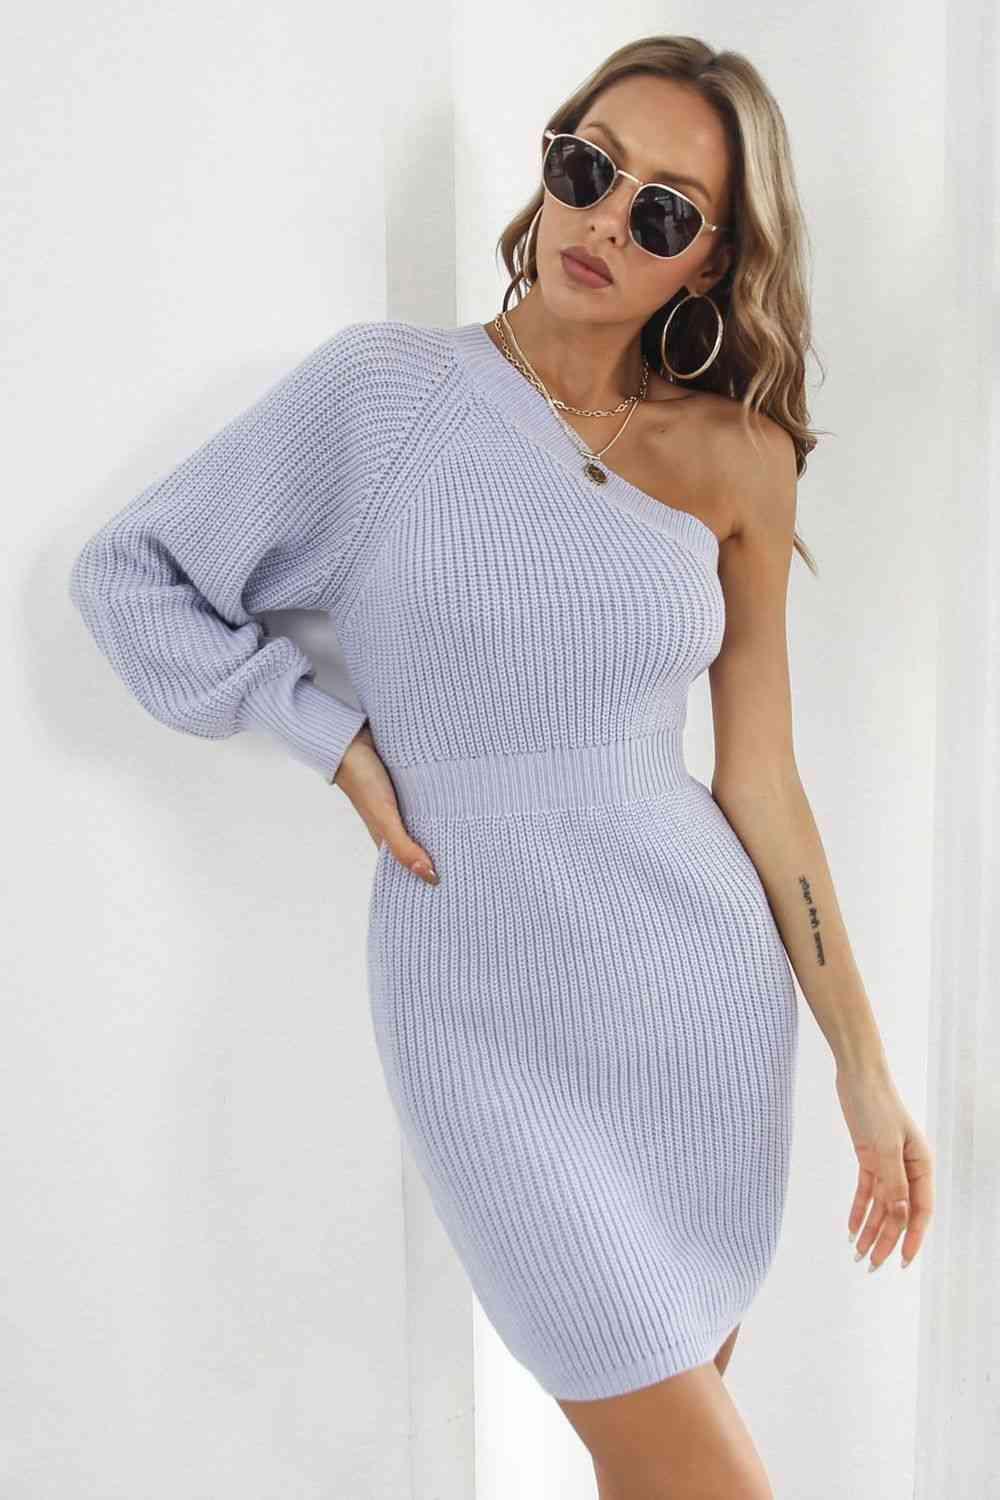 Comfy Chic Knitted One Shoulder Sweater Dress - MXSTUDIO.COM